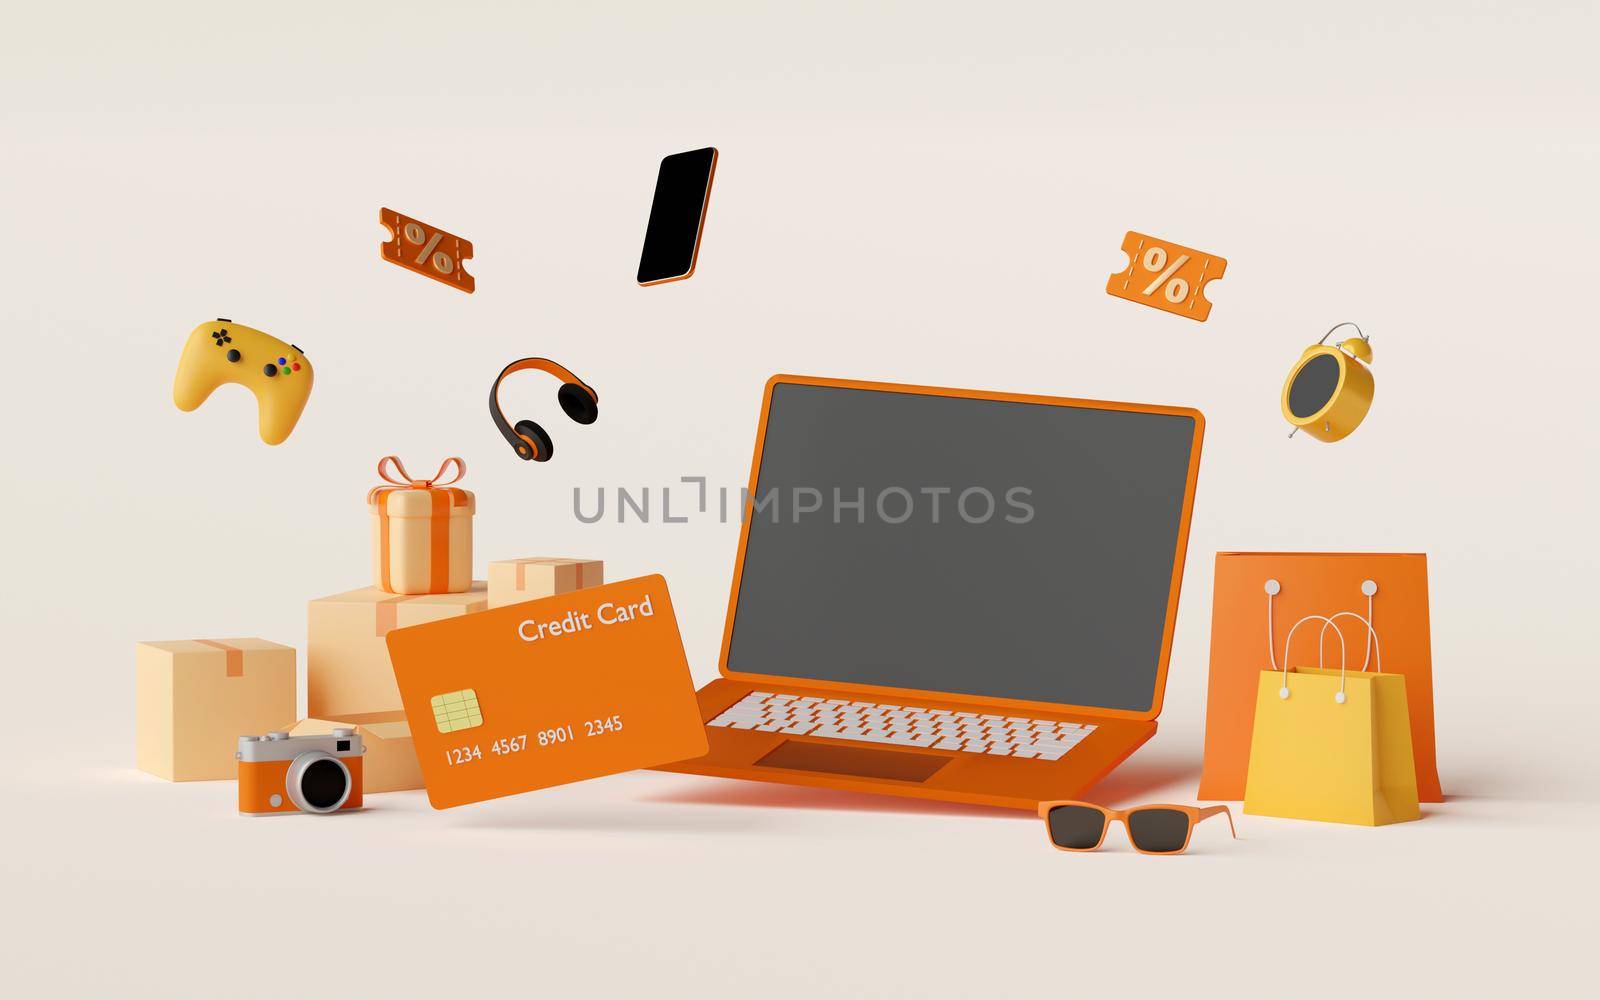 3d illustration of Shopping online with credit card concept, blank screen laptop with credit card, parcel box and items by nutzchotwarut